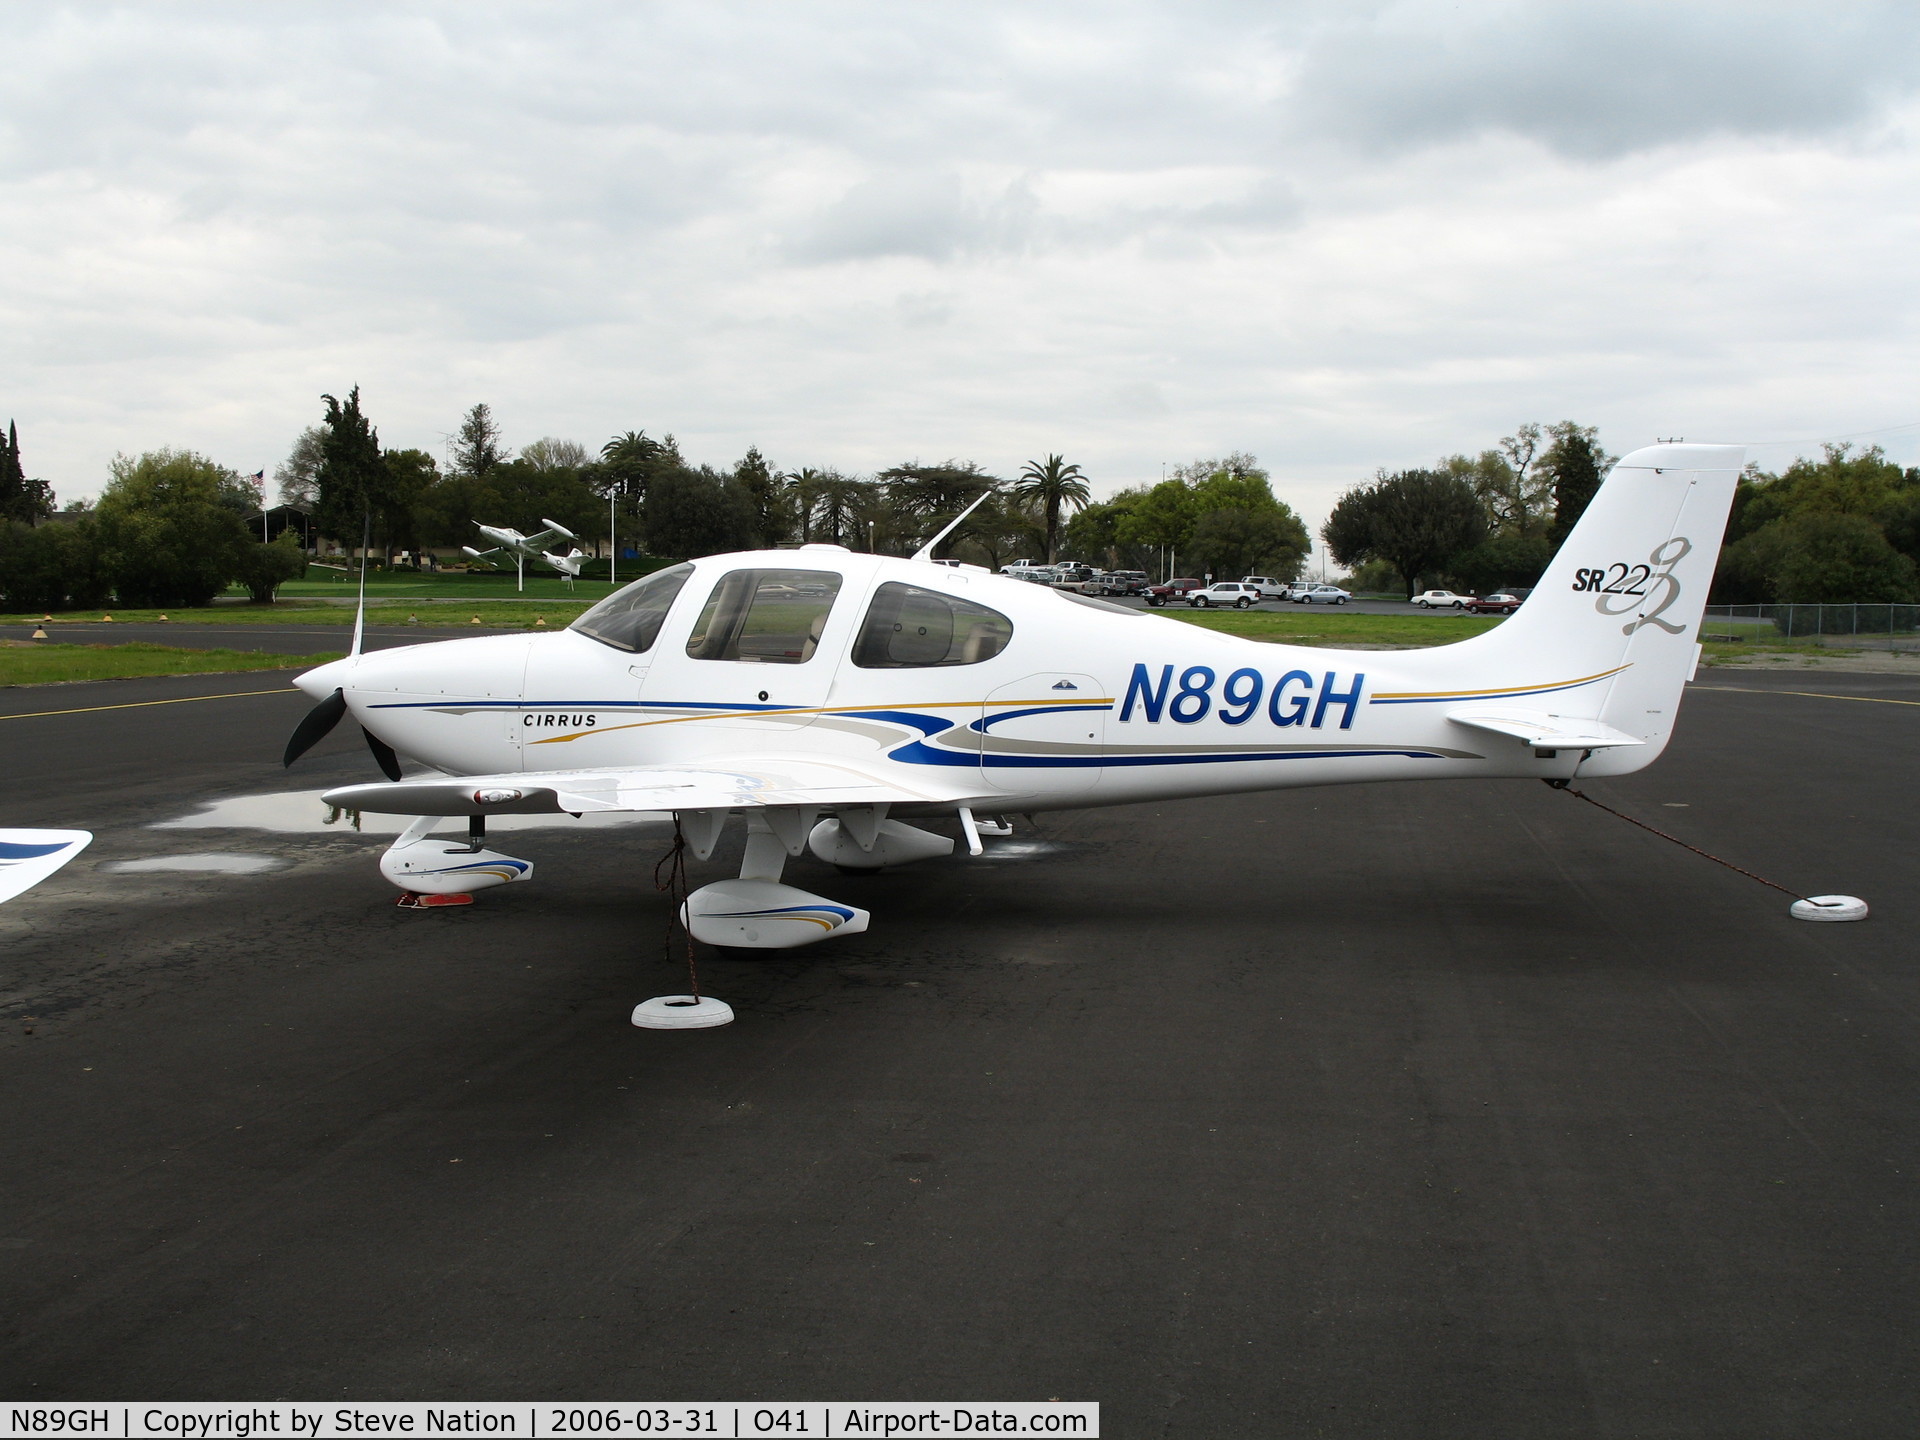 N89GH, 2004 Cirrus SR22 G2 C/N 1178, In for maintenance with Woodland Avn @ Woodland-Watts Airport, CA